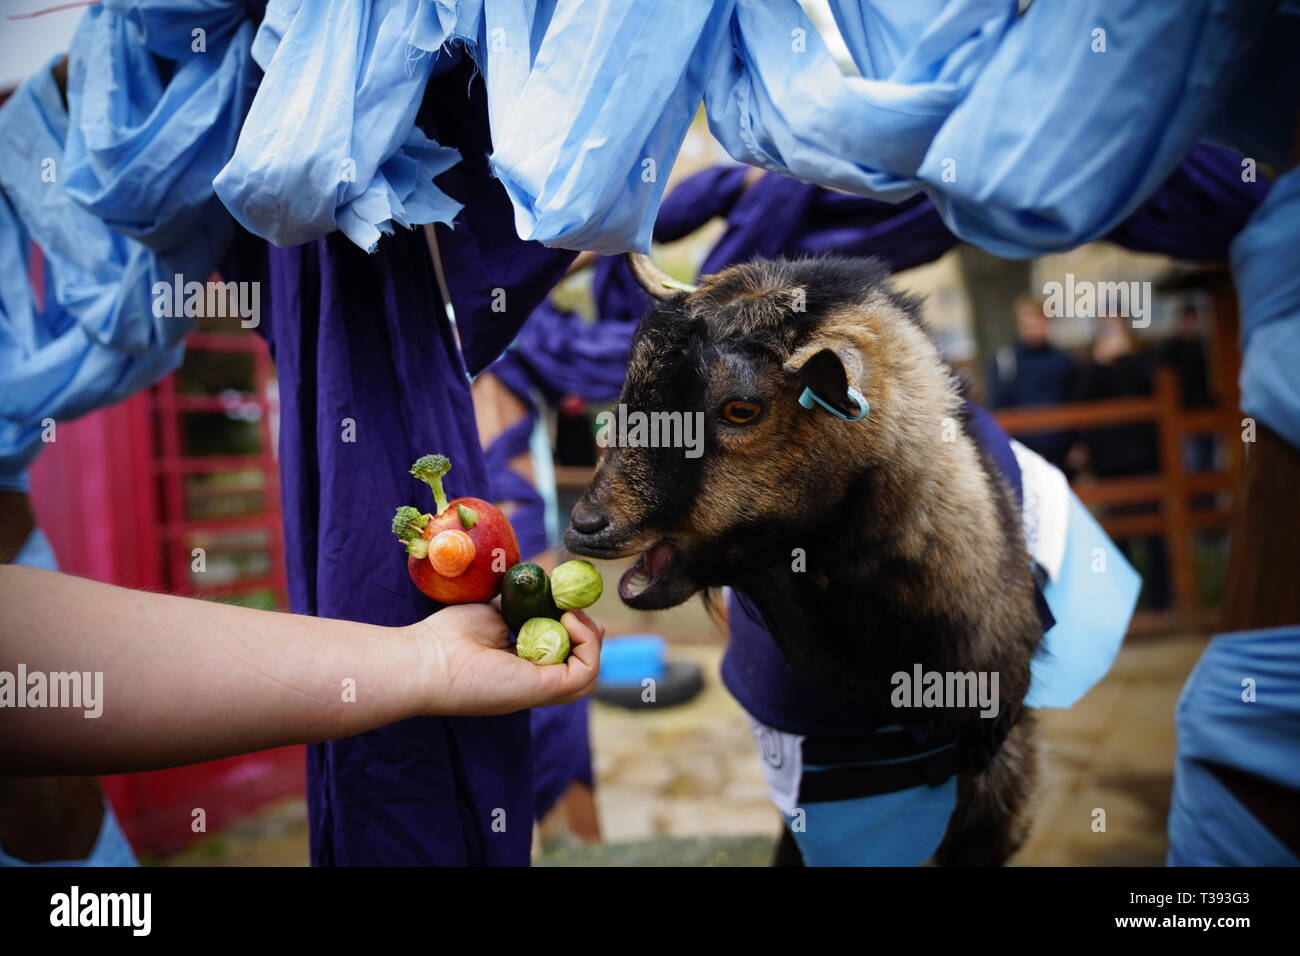 Coinciding with the Oxford & Cambridge Boat Race, two goats (one representing Oxford and one representing Cambridge) race for victory. Stock Photo